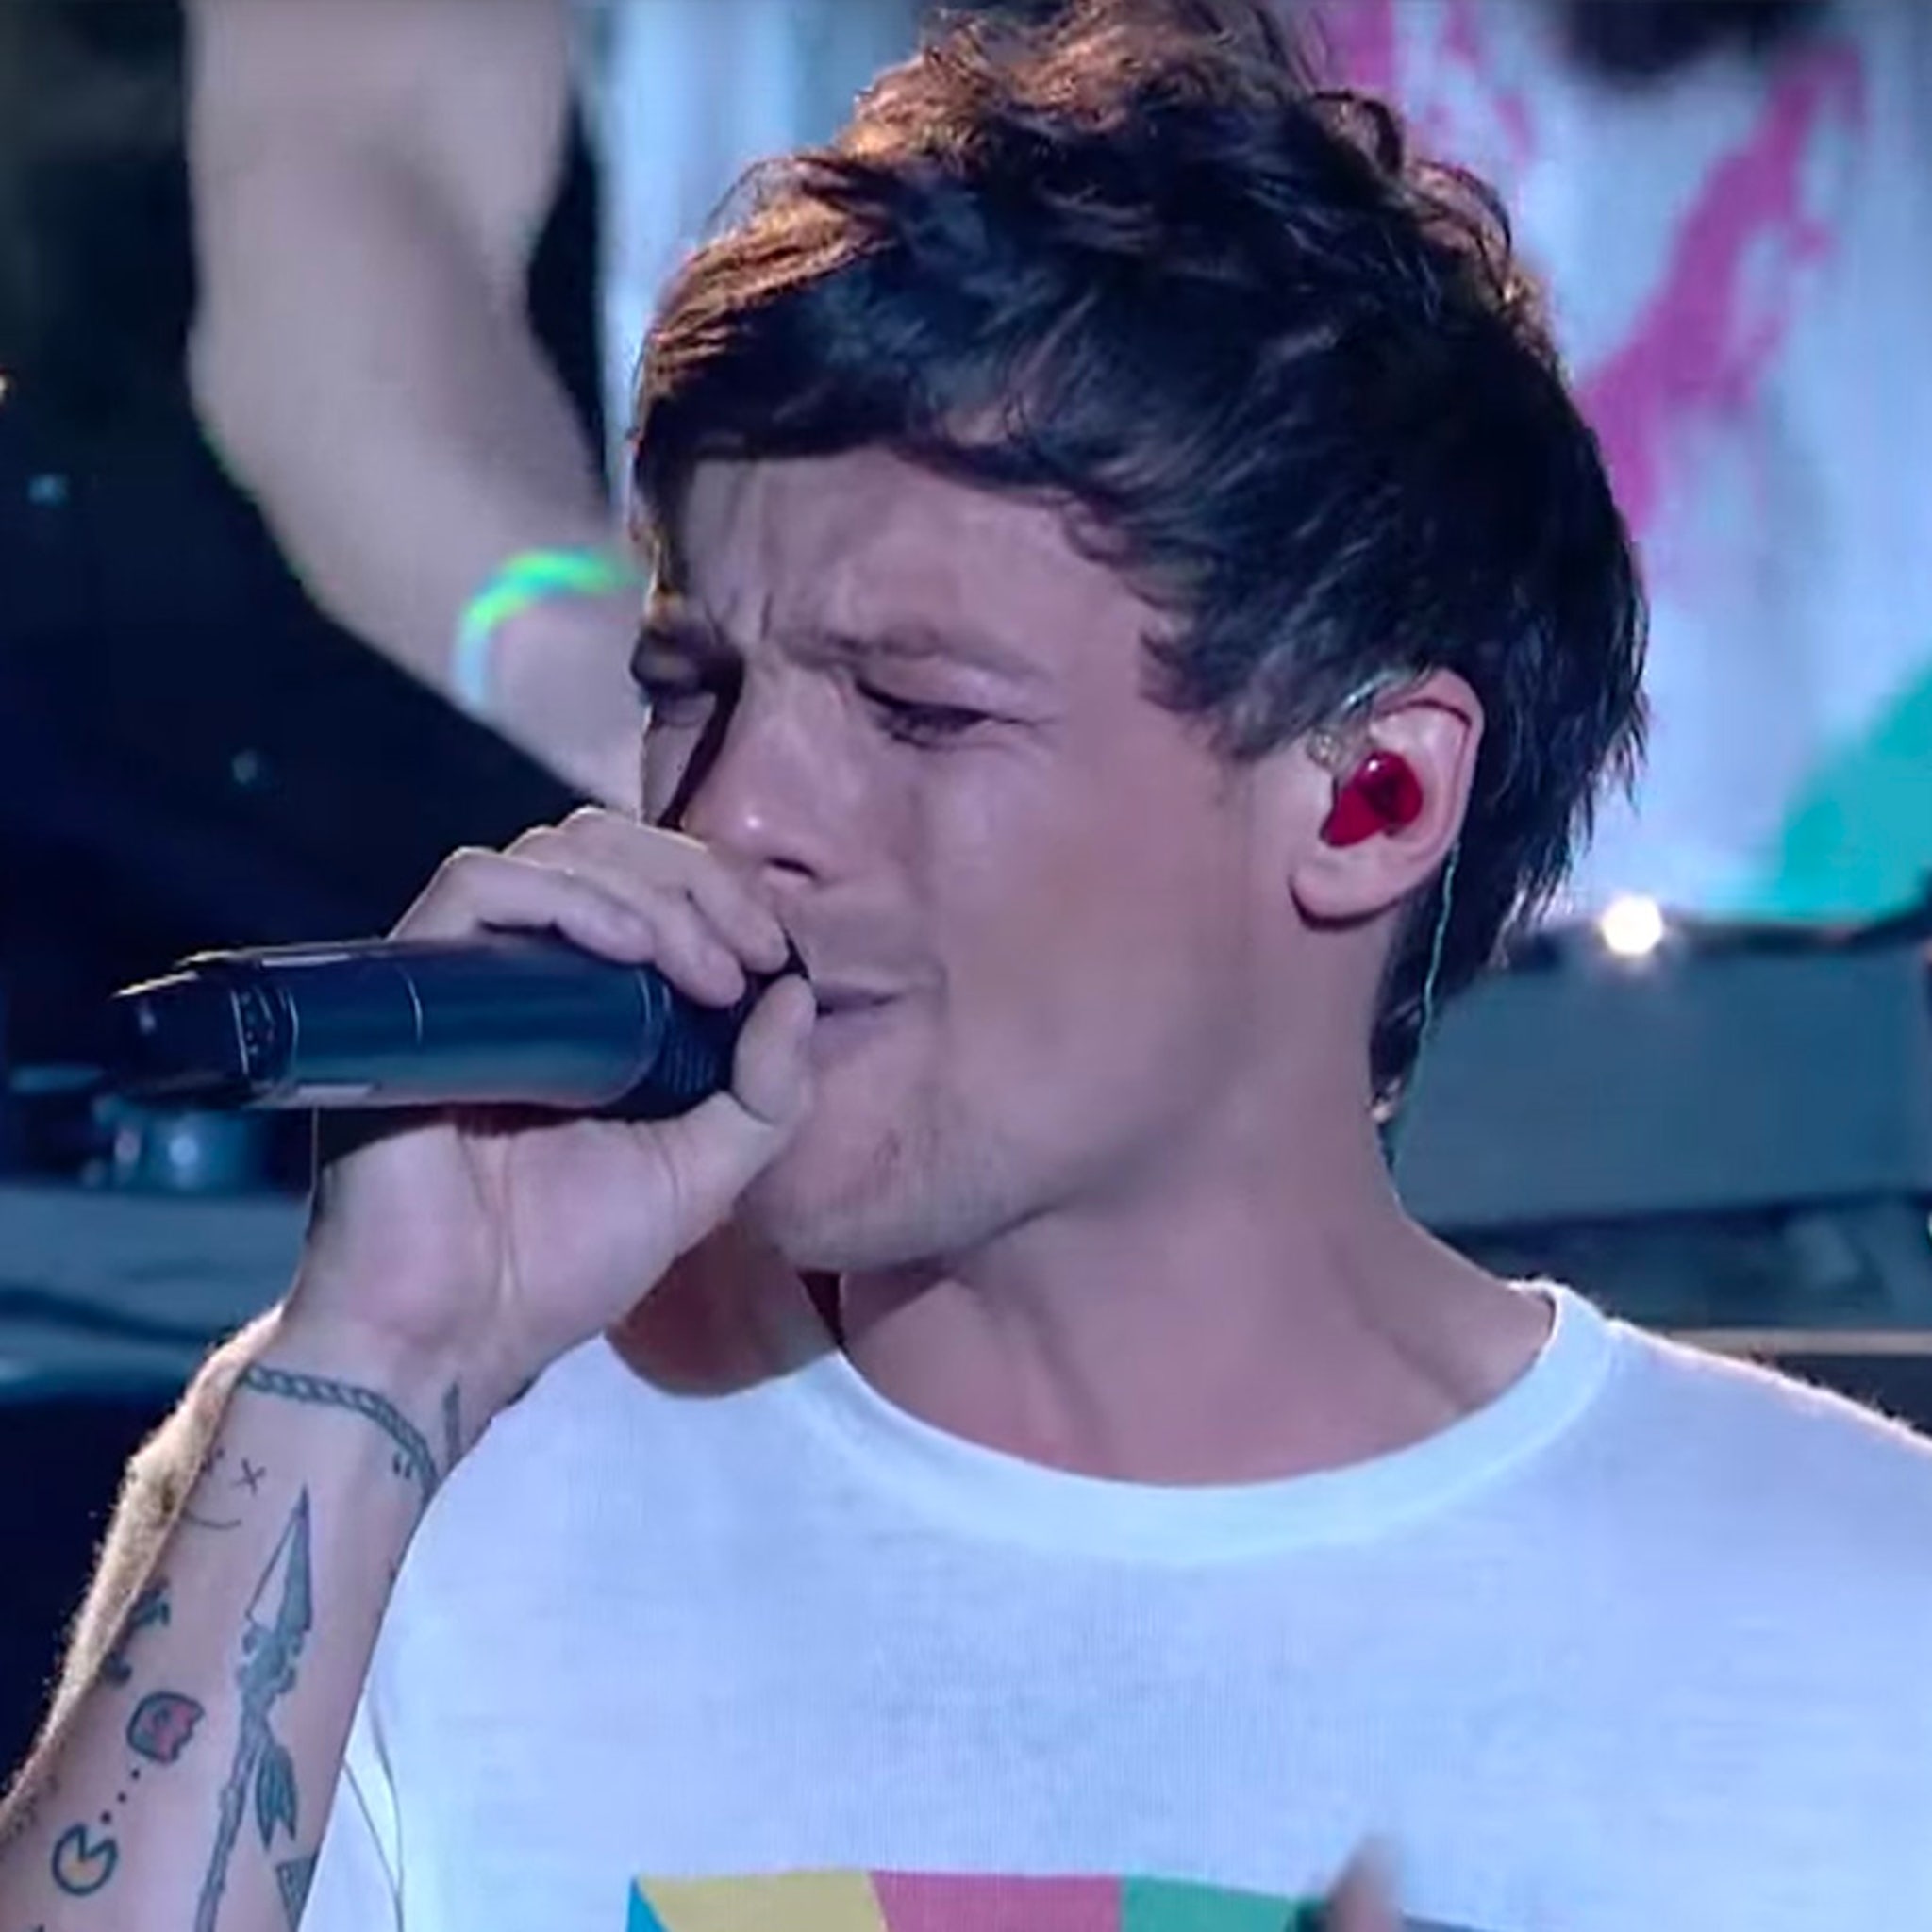 Louis Tomlinson reveals he was 'terrified' when he performed on X Factor  just days after mum's death - Mirror Online